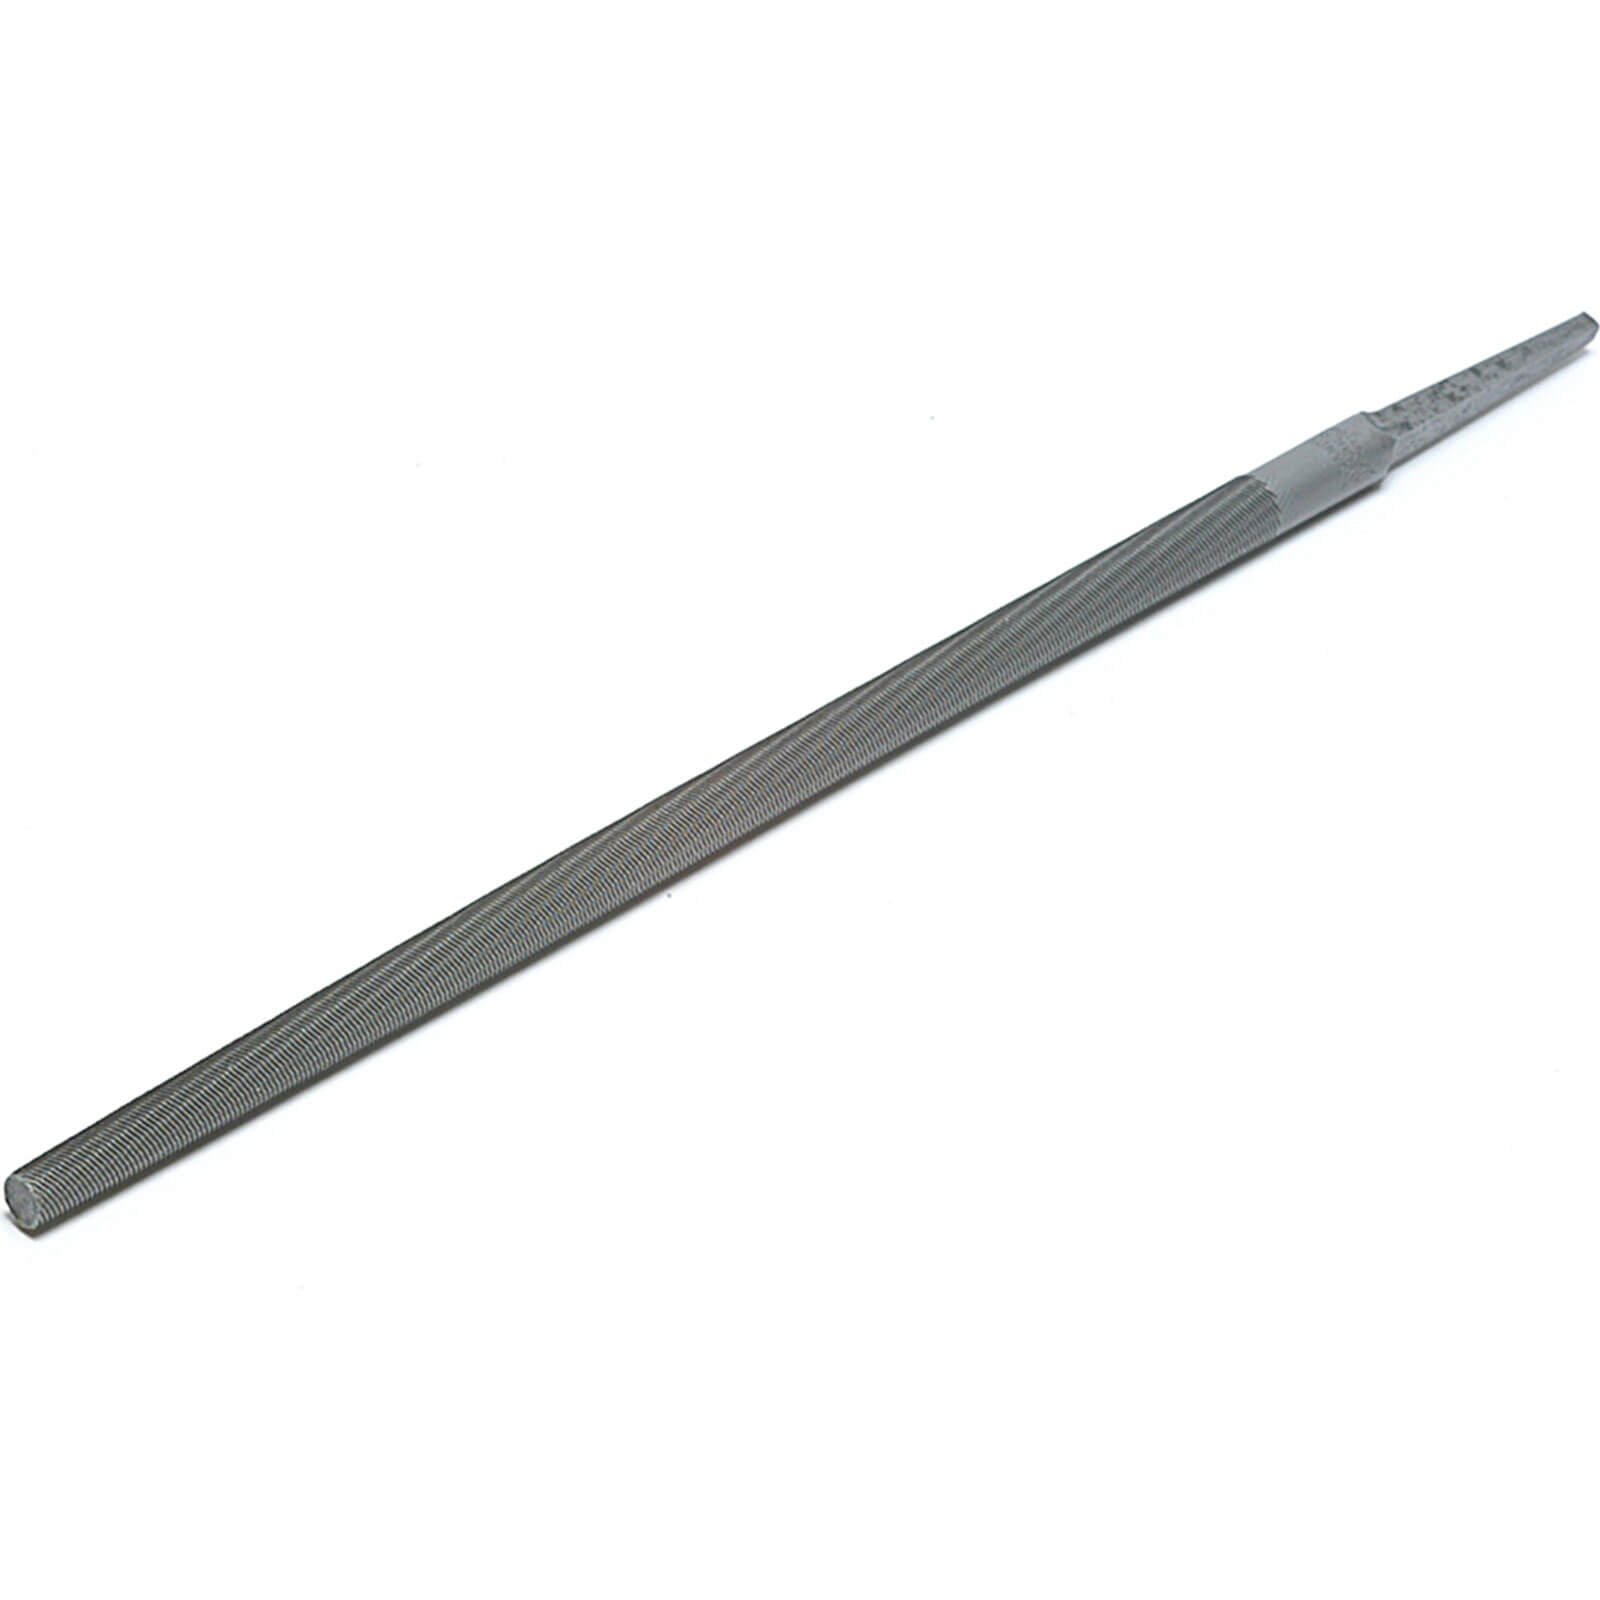 Bahco Round Smooth Cut File 4"